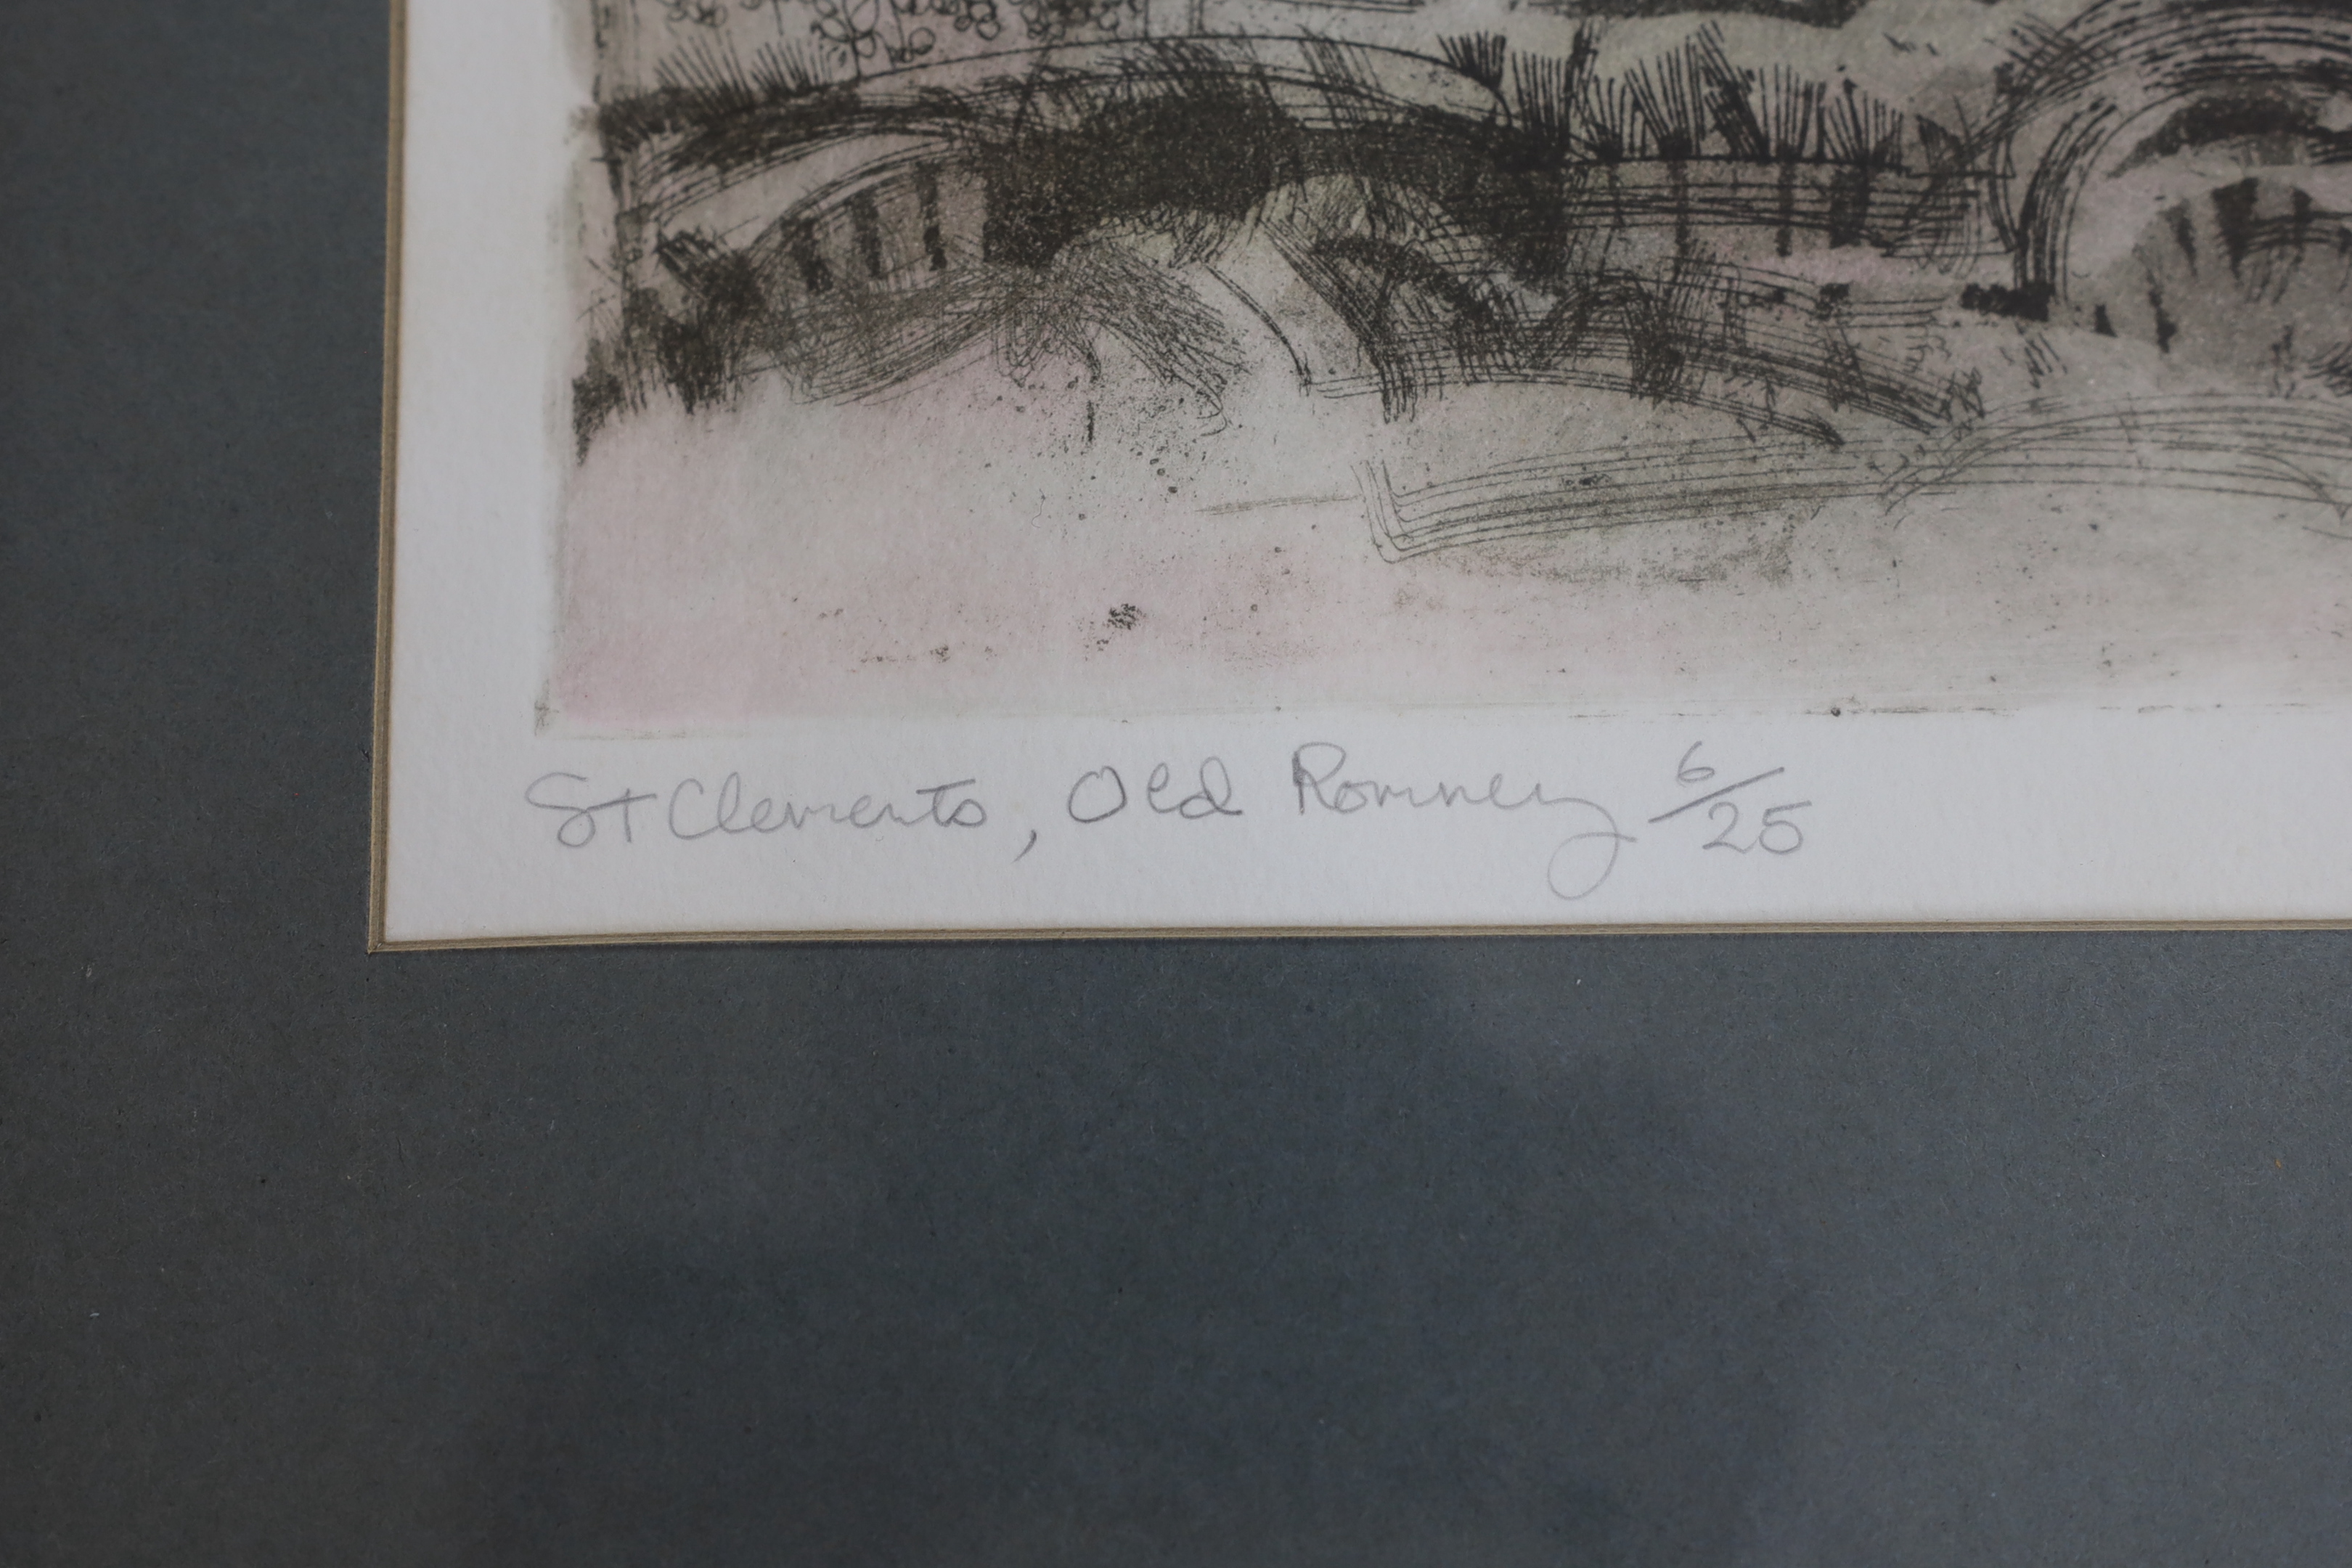 Graham Clarke (b.1941) etching, 'St. Clements, Old Romney', signed in pencil, limited edition, 6/25, label verso, 29 x 37cm